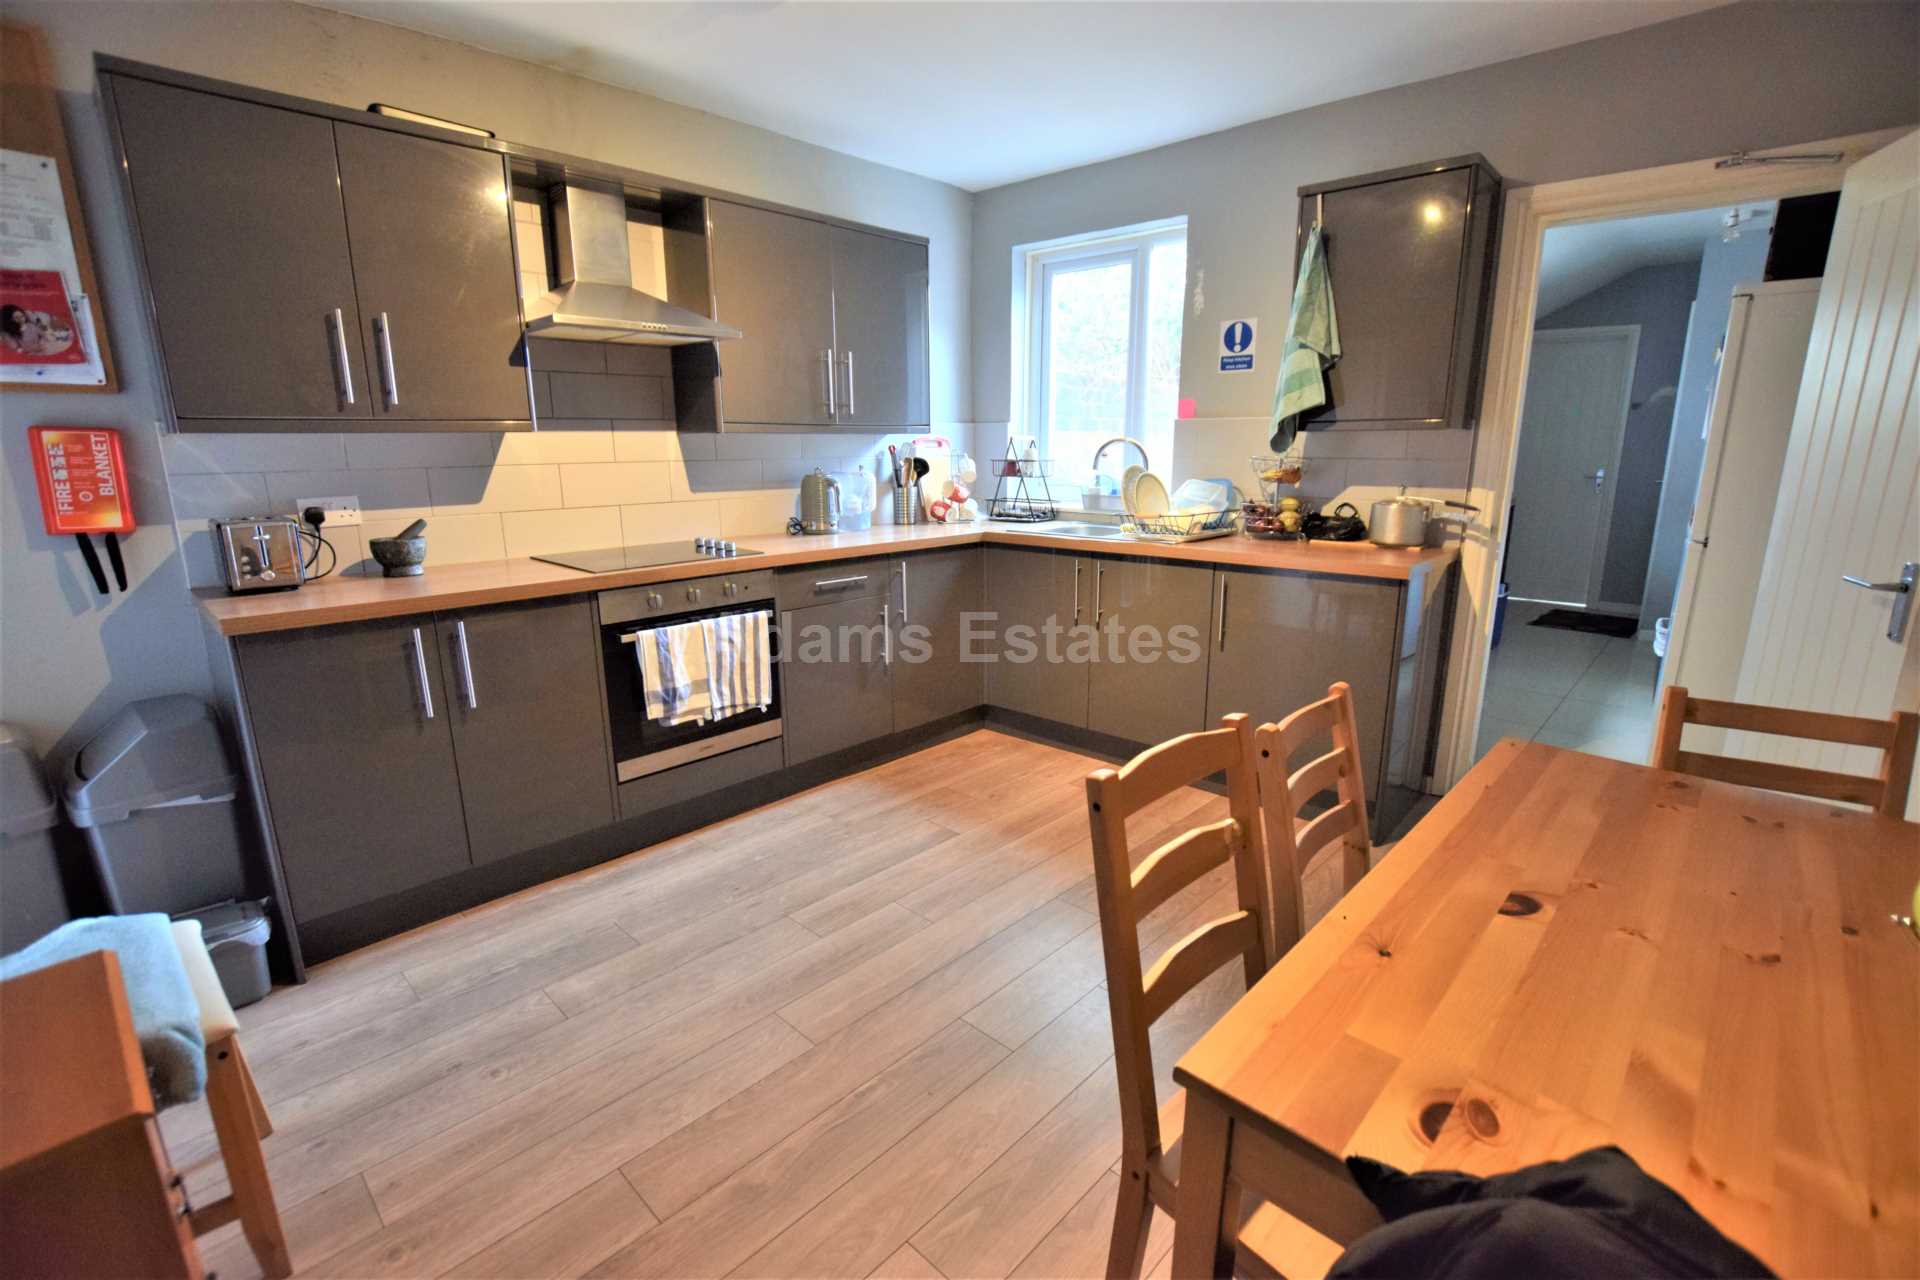 5 bed Mid Terraced House for rent in Reading. From Student Holmes - University Office